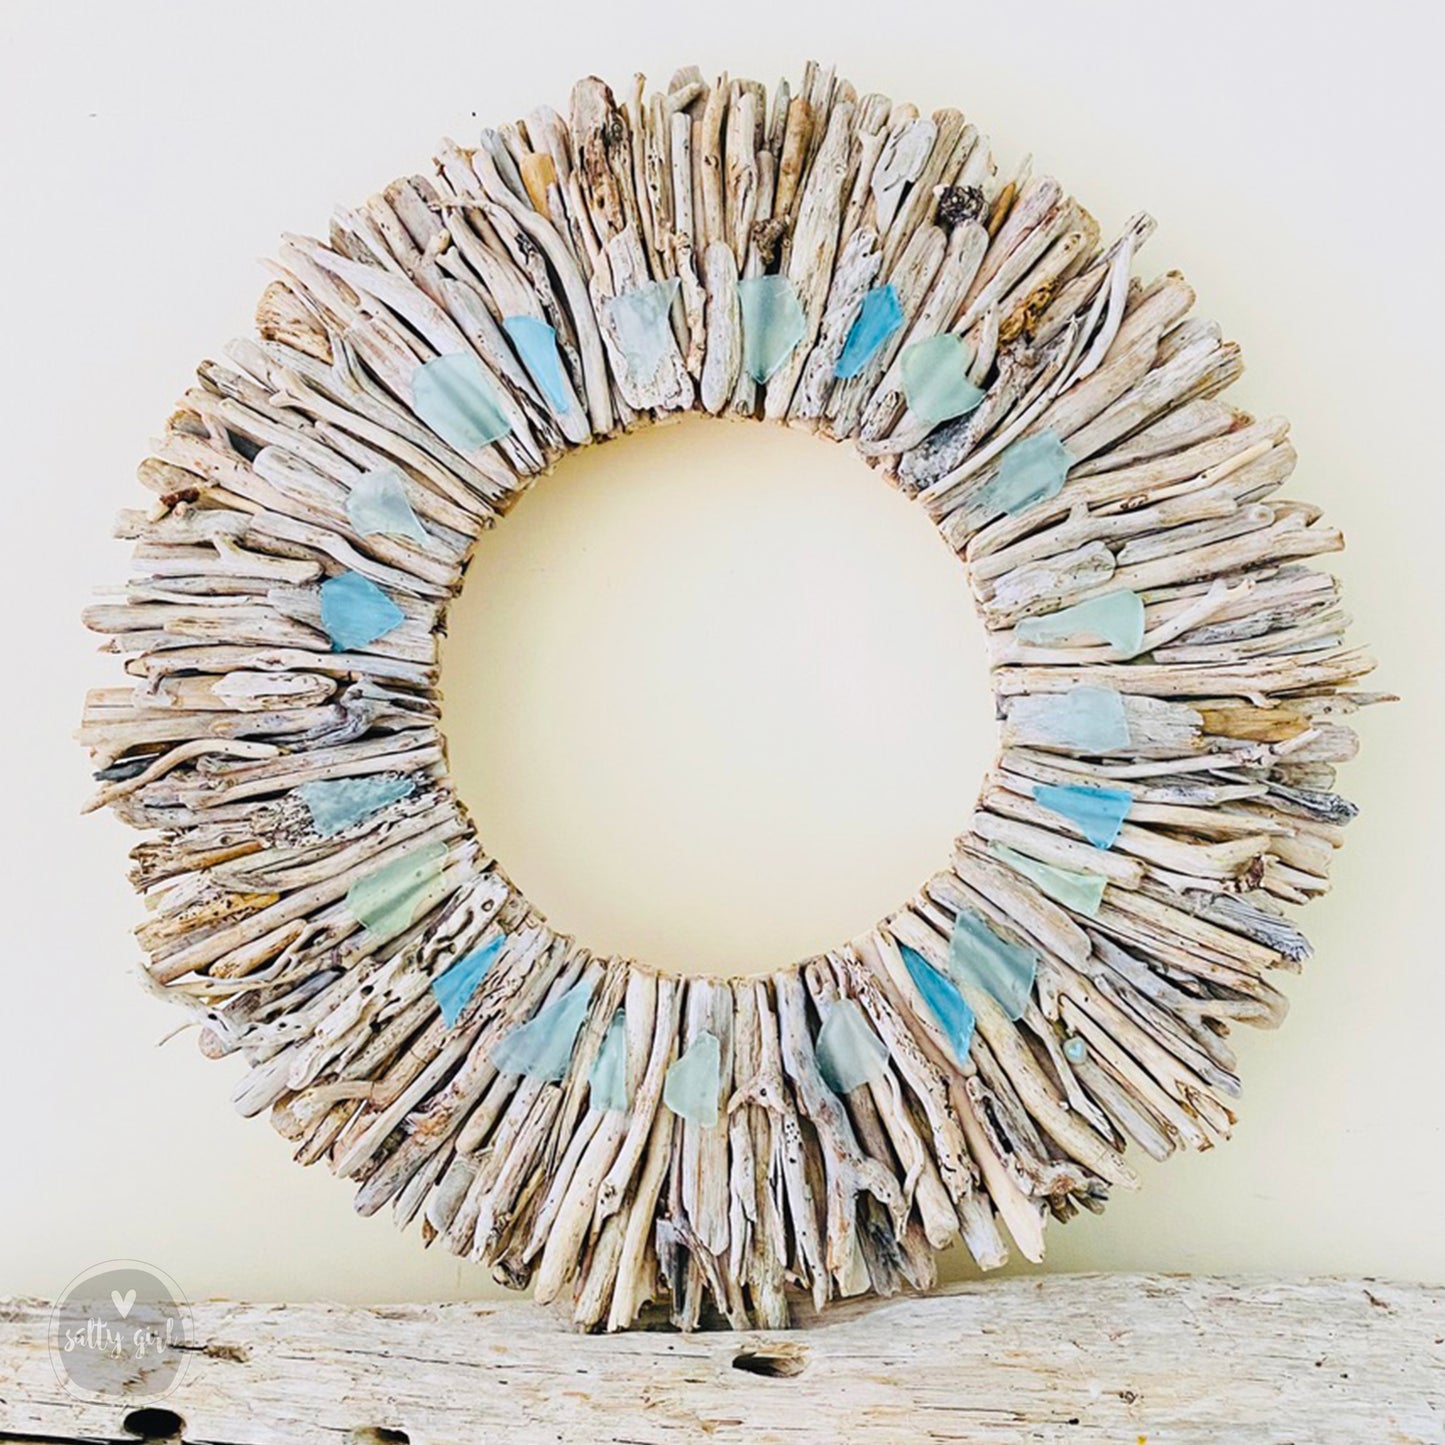 Maine Sun Bleached Driftwood Wreath with Subtle Blue & Green Sea Glass Accents - Sizes: 20" or 24"